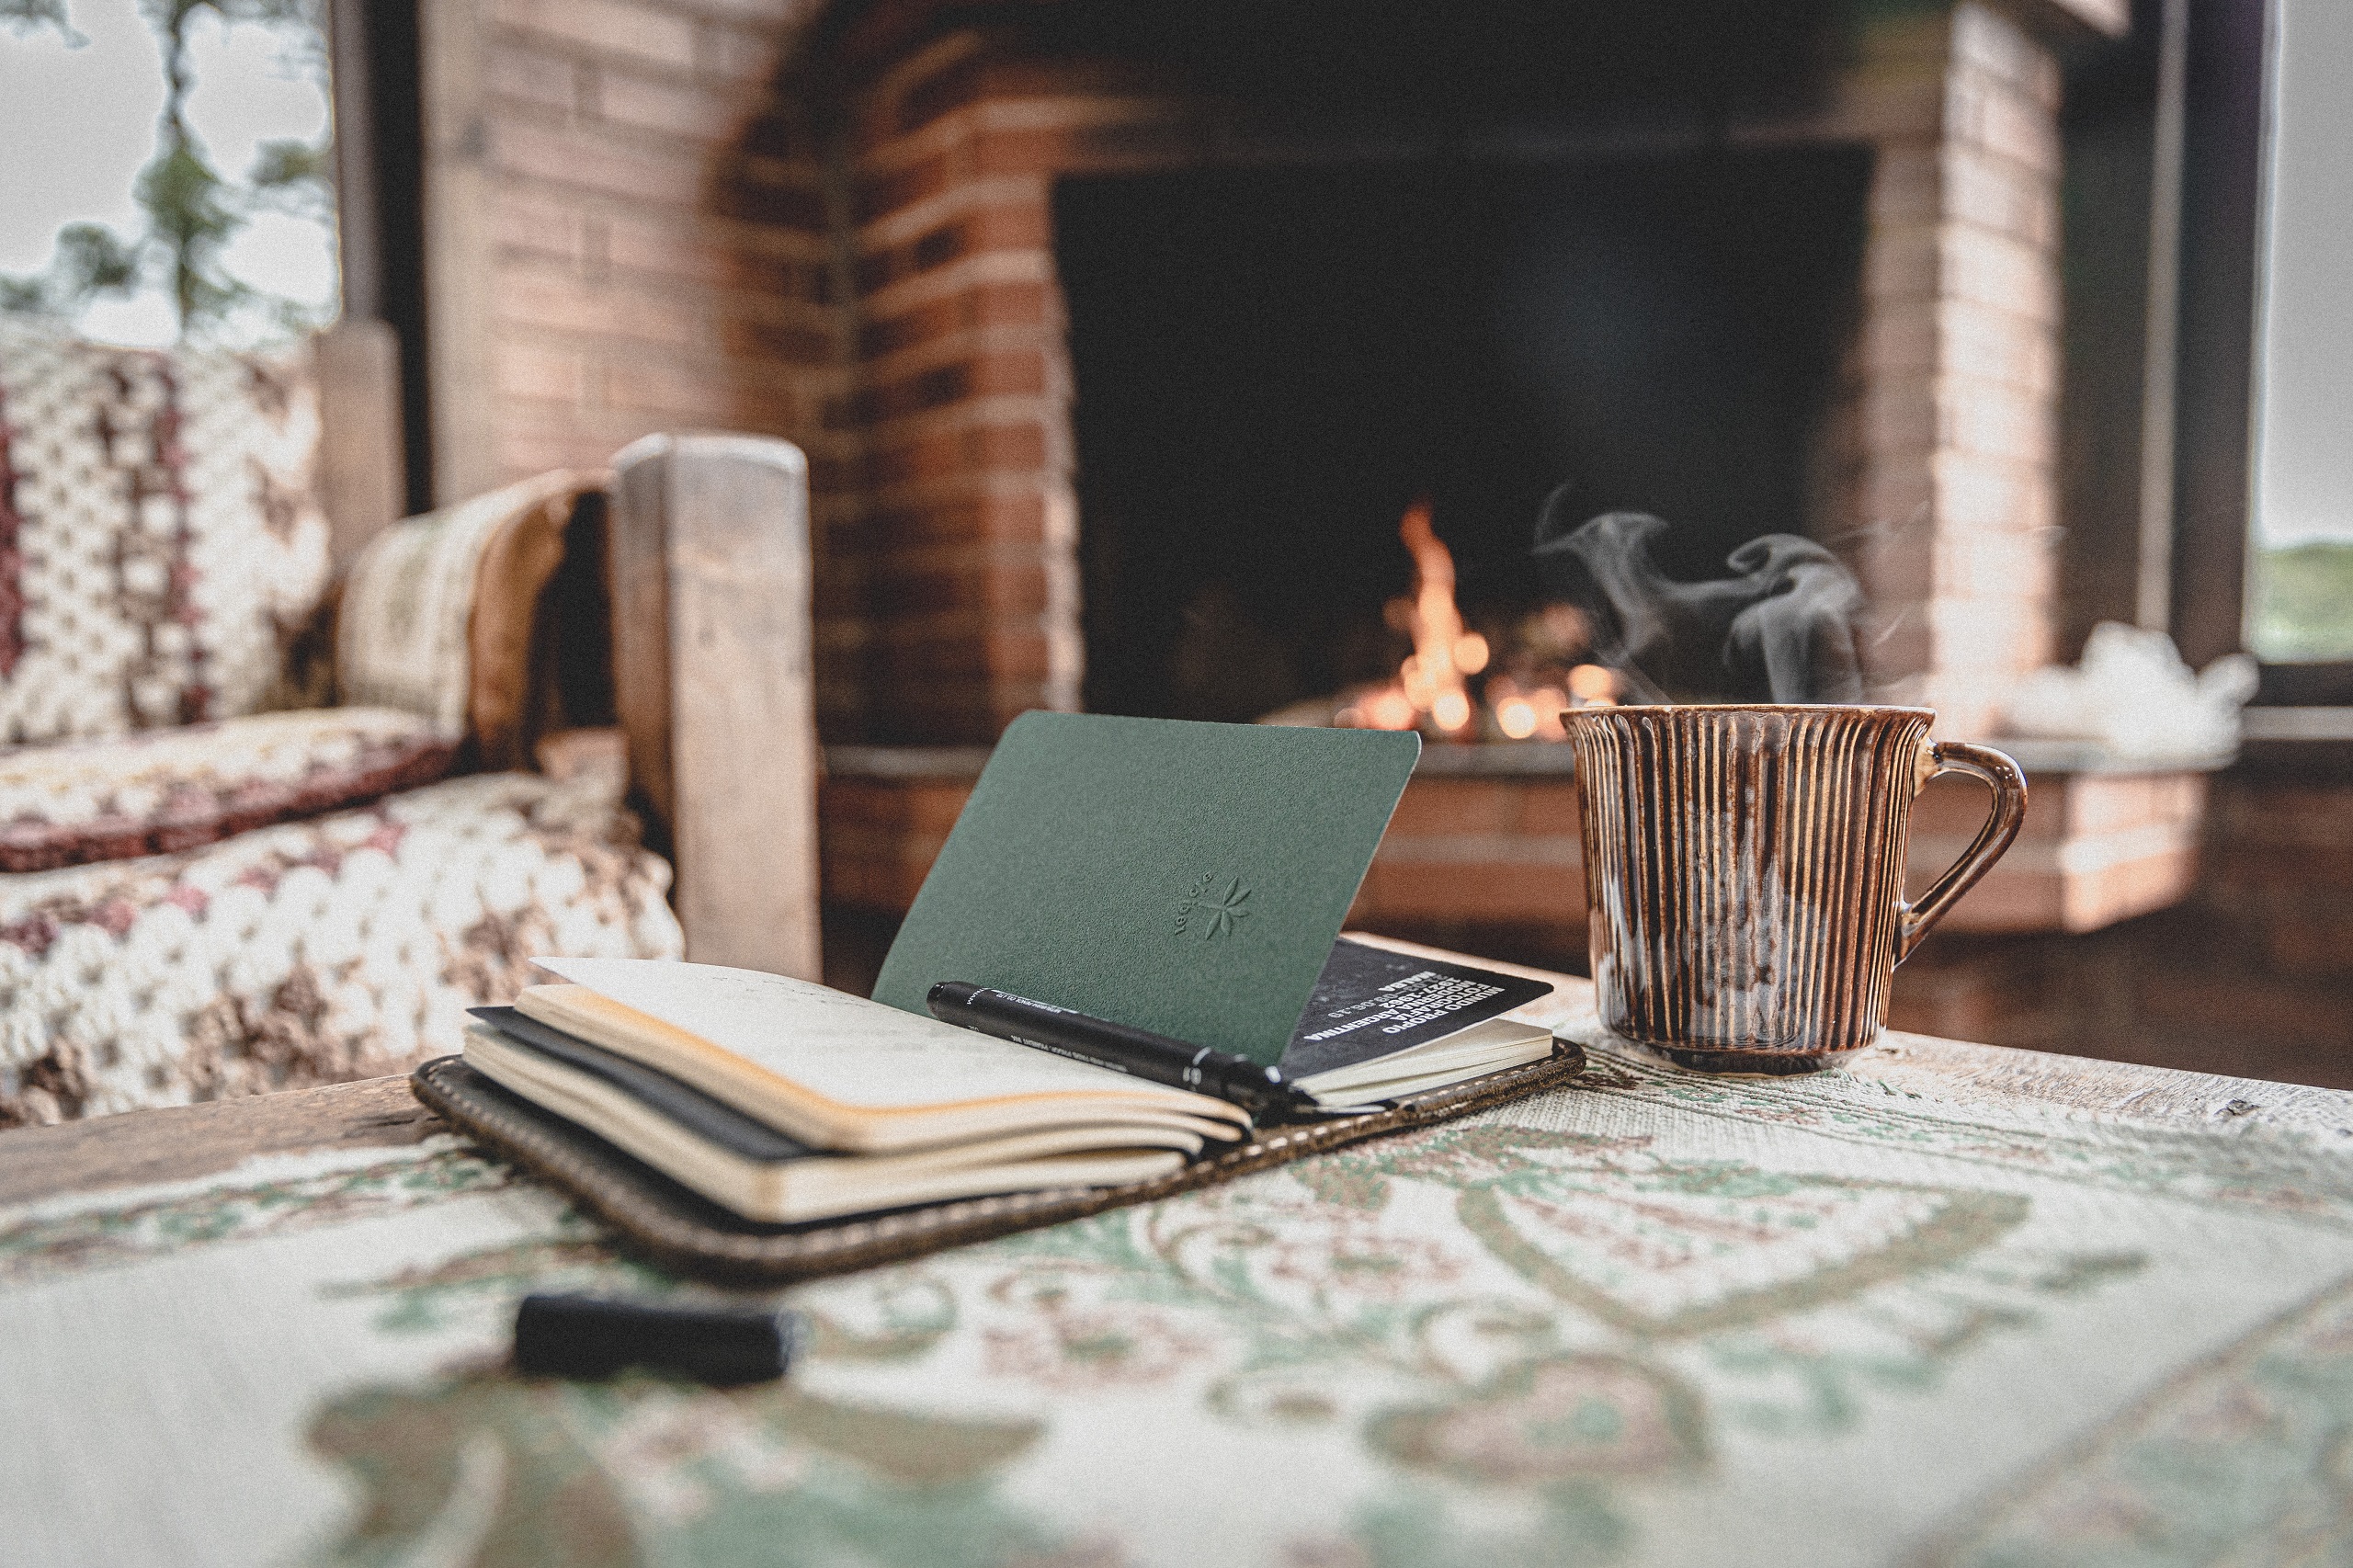 An open book sits on a table next to a steaming mug with a hot drink. In the background is an armchair and a lit fireplace.